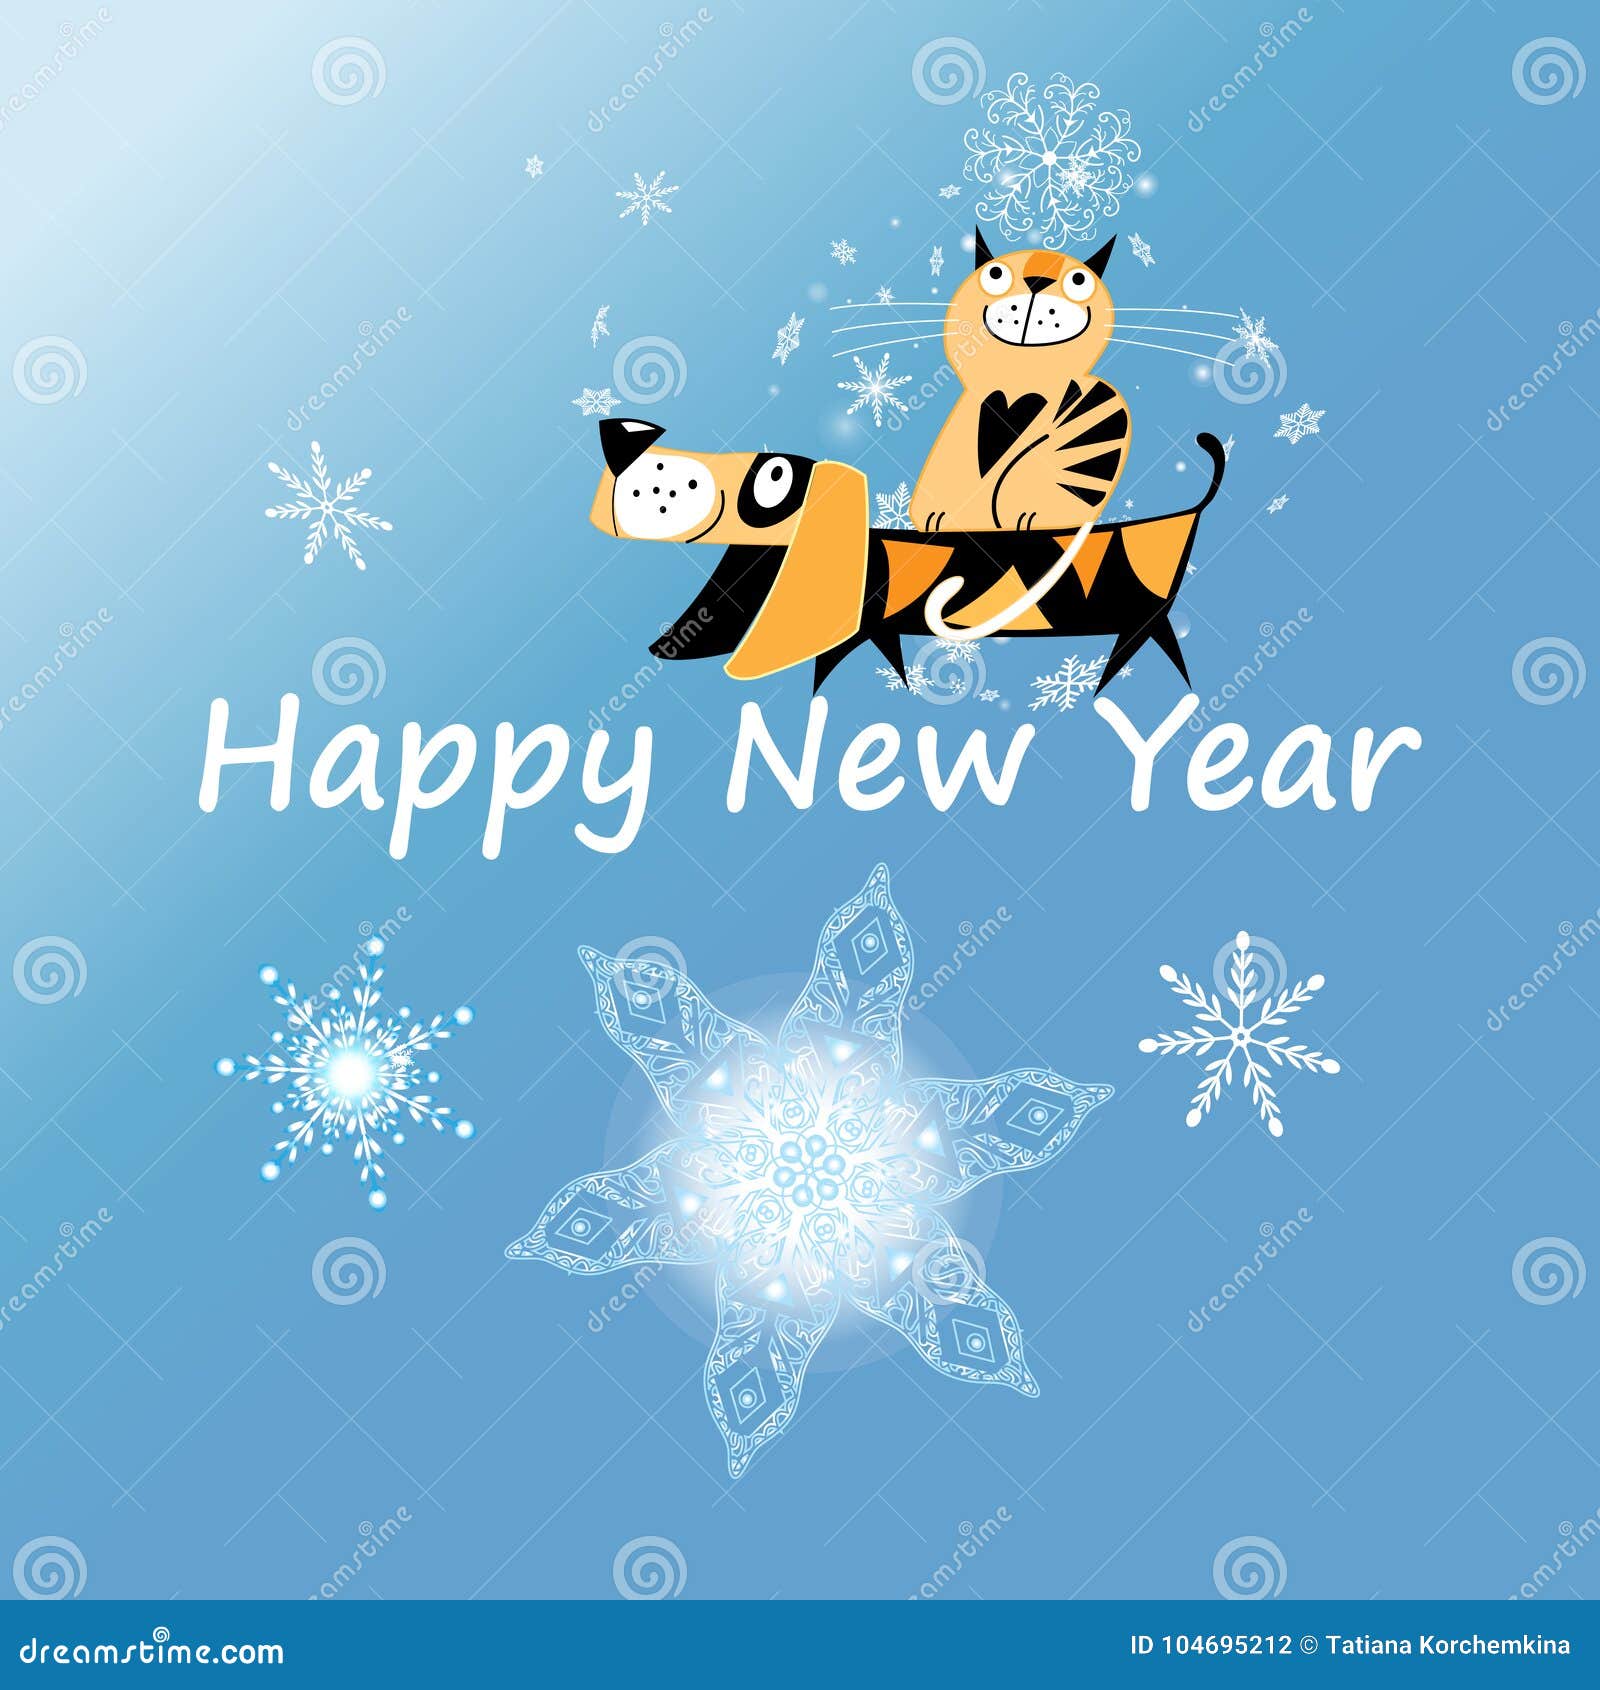 New Year Greeting Card with Dog and Cat Stock Vector Illustration of